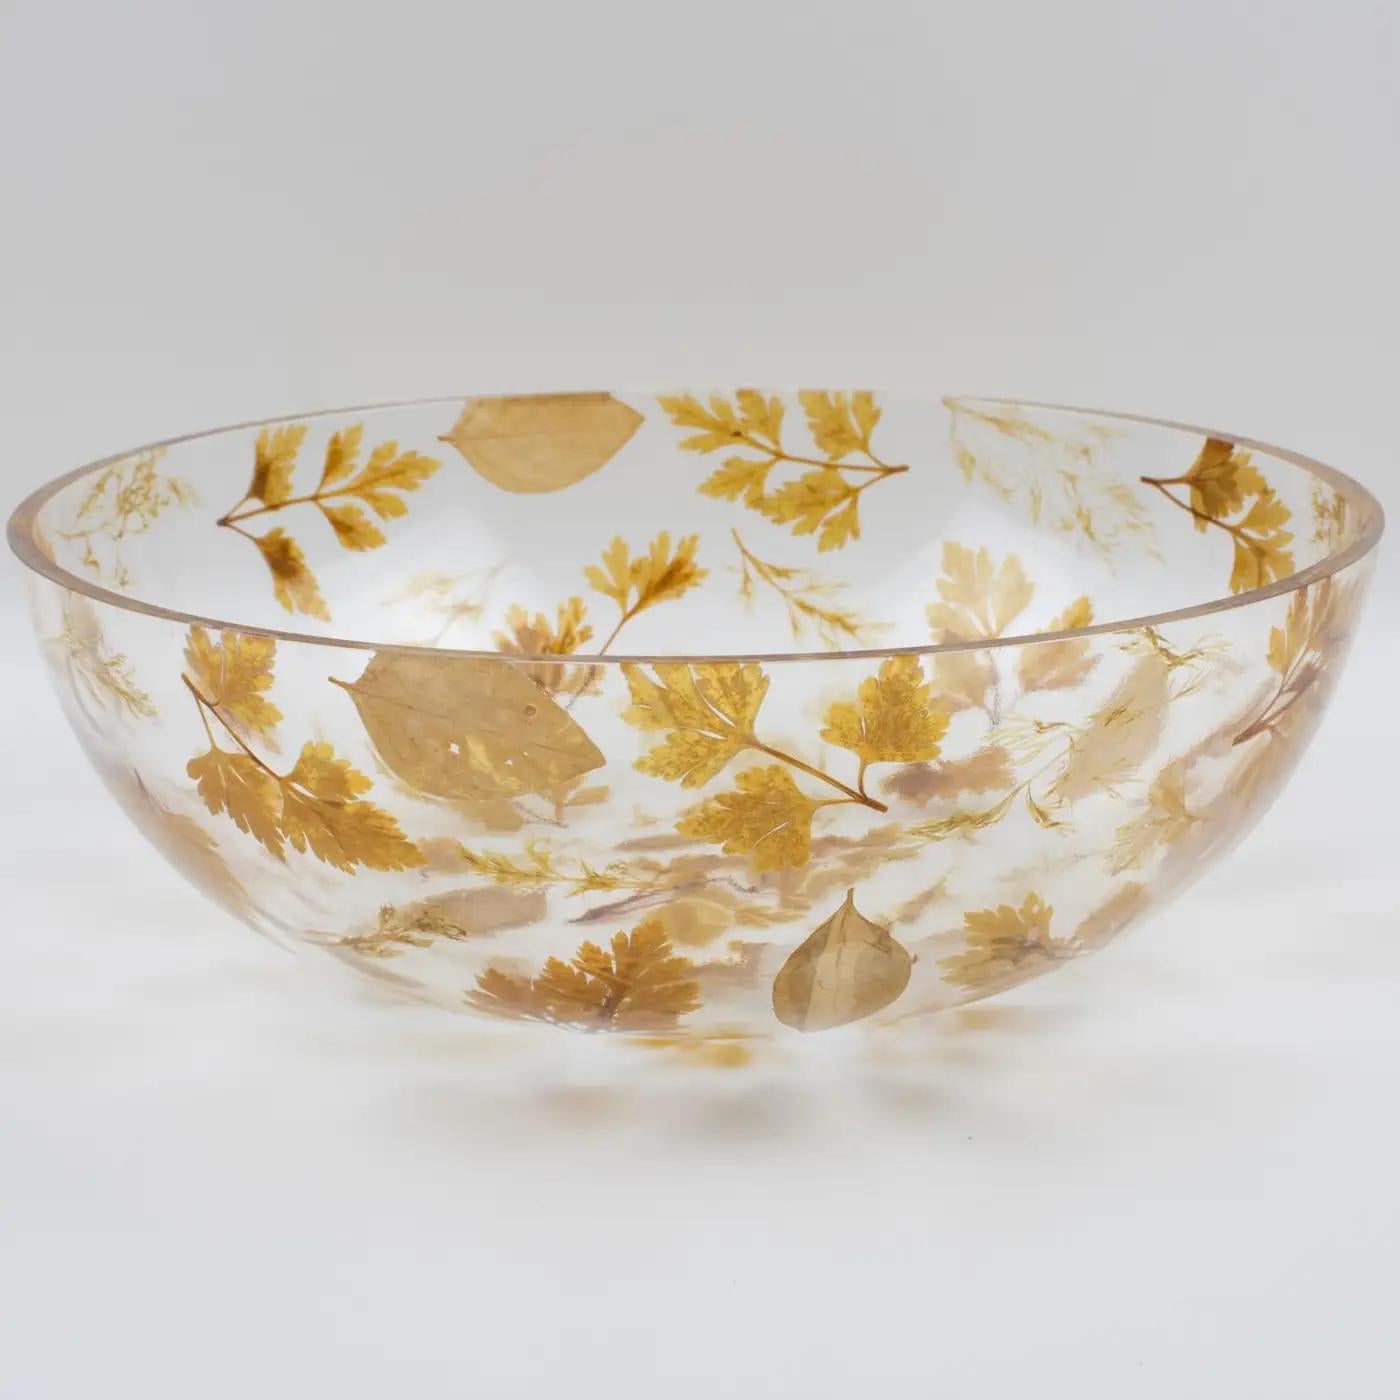 A lovely resin decorative bowl, centerpiece, or serving dish designed by Resinplast Italy in the 1970s. Extra thick clear resin or acrylic in a deep, rounded bowl shape with assorted real autumn leaves embedded in the material. The natural light